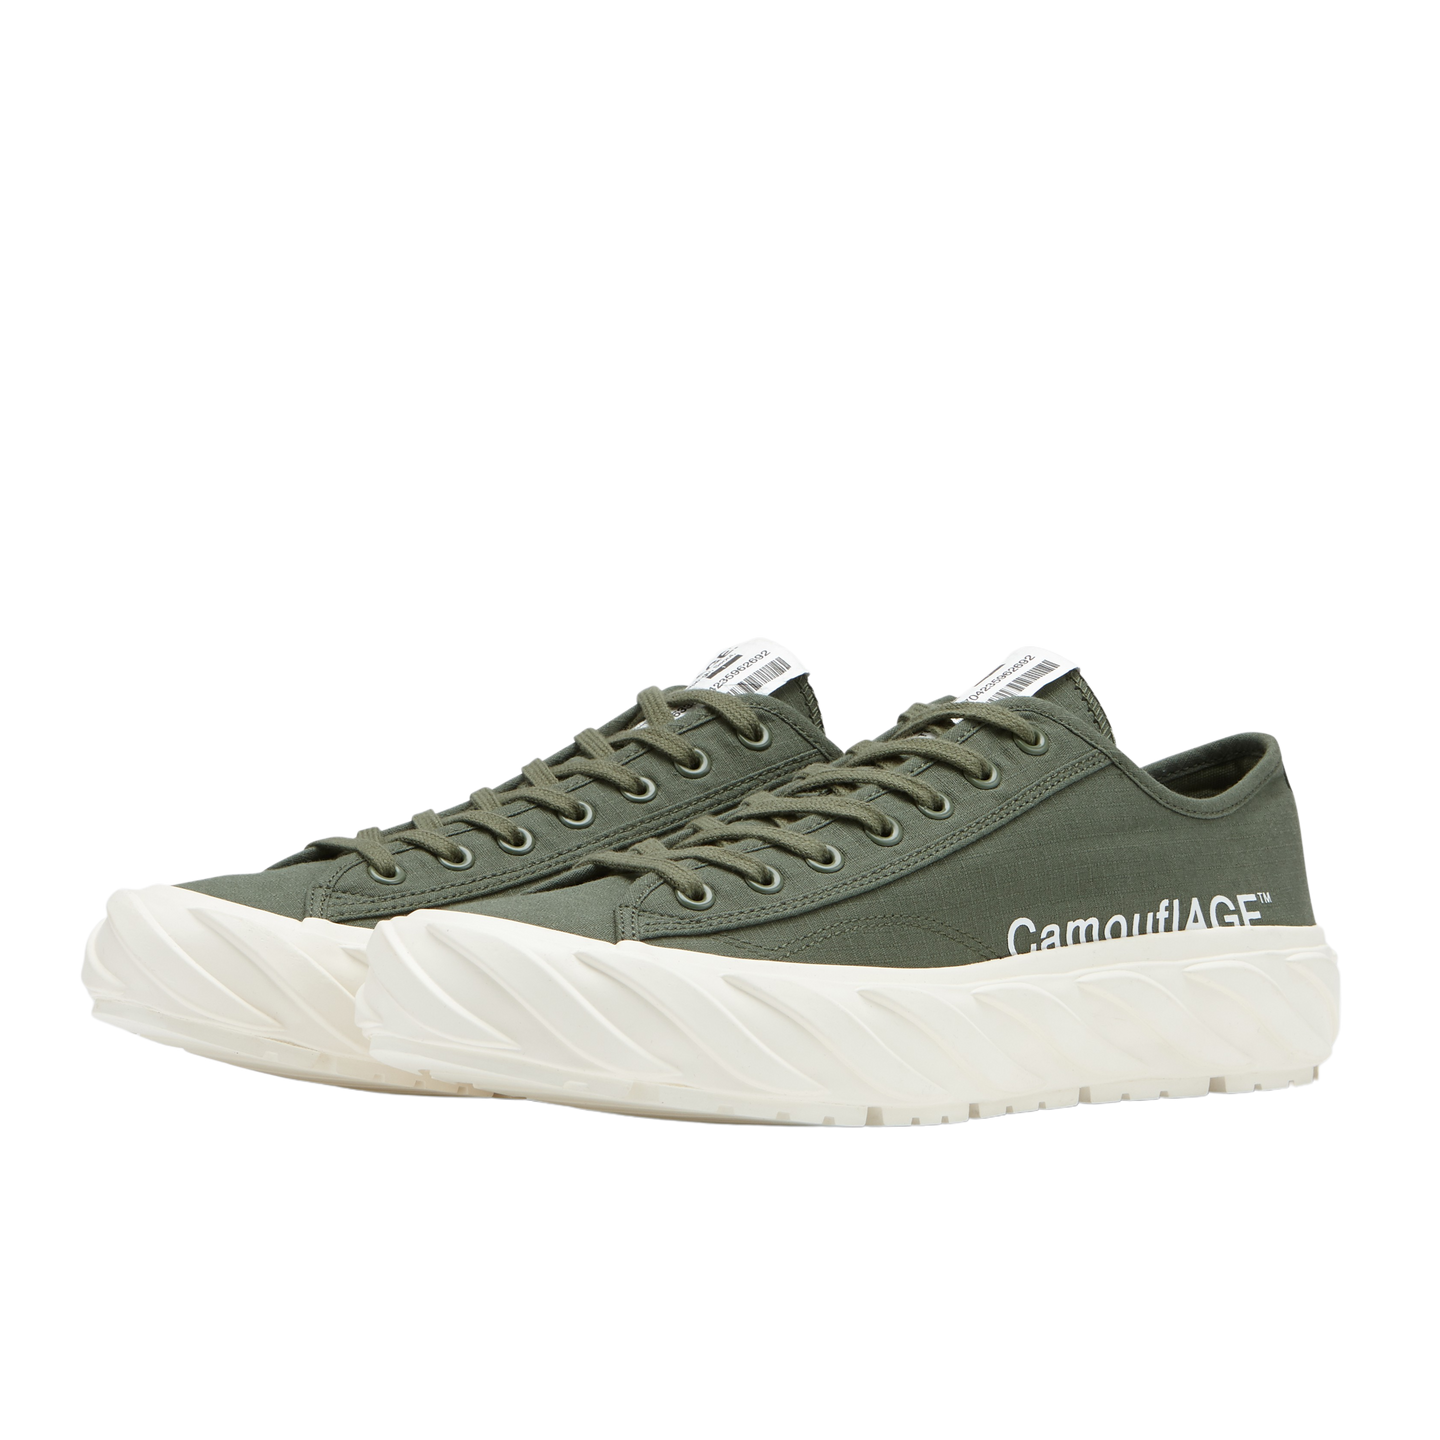 AGE SNEAKERS Cut Camouflage Sage